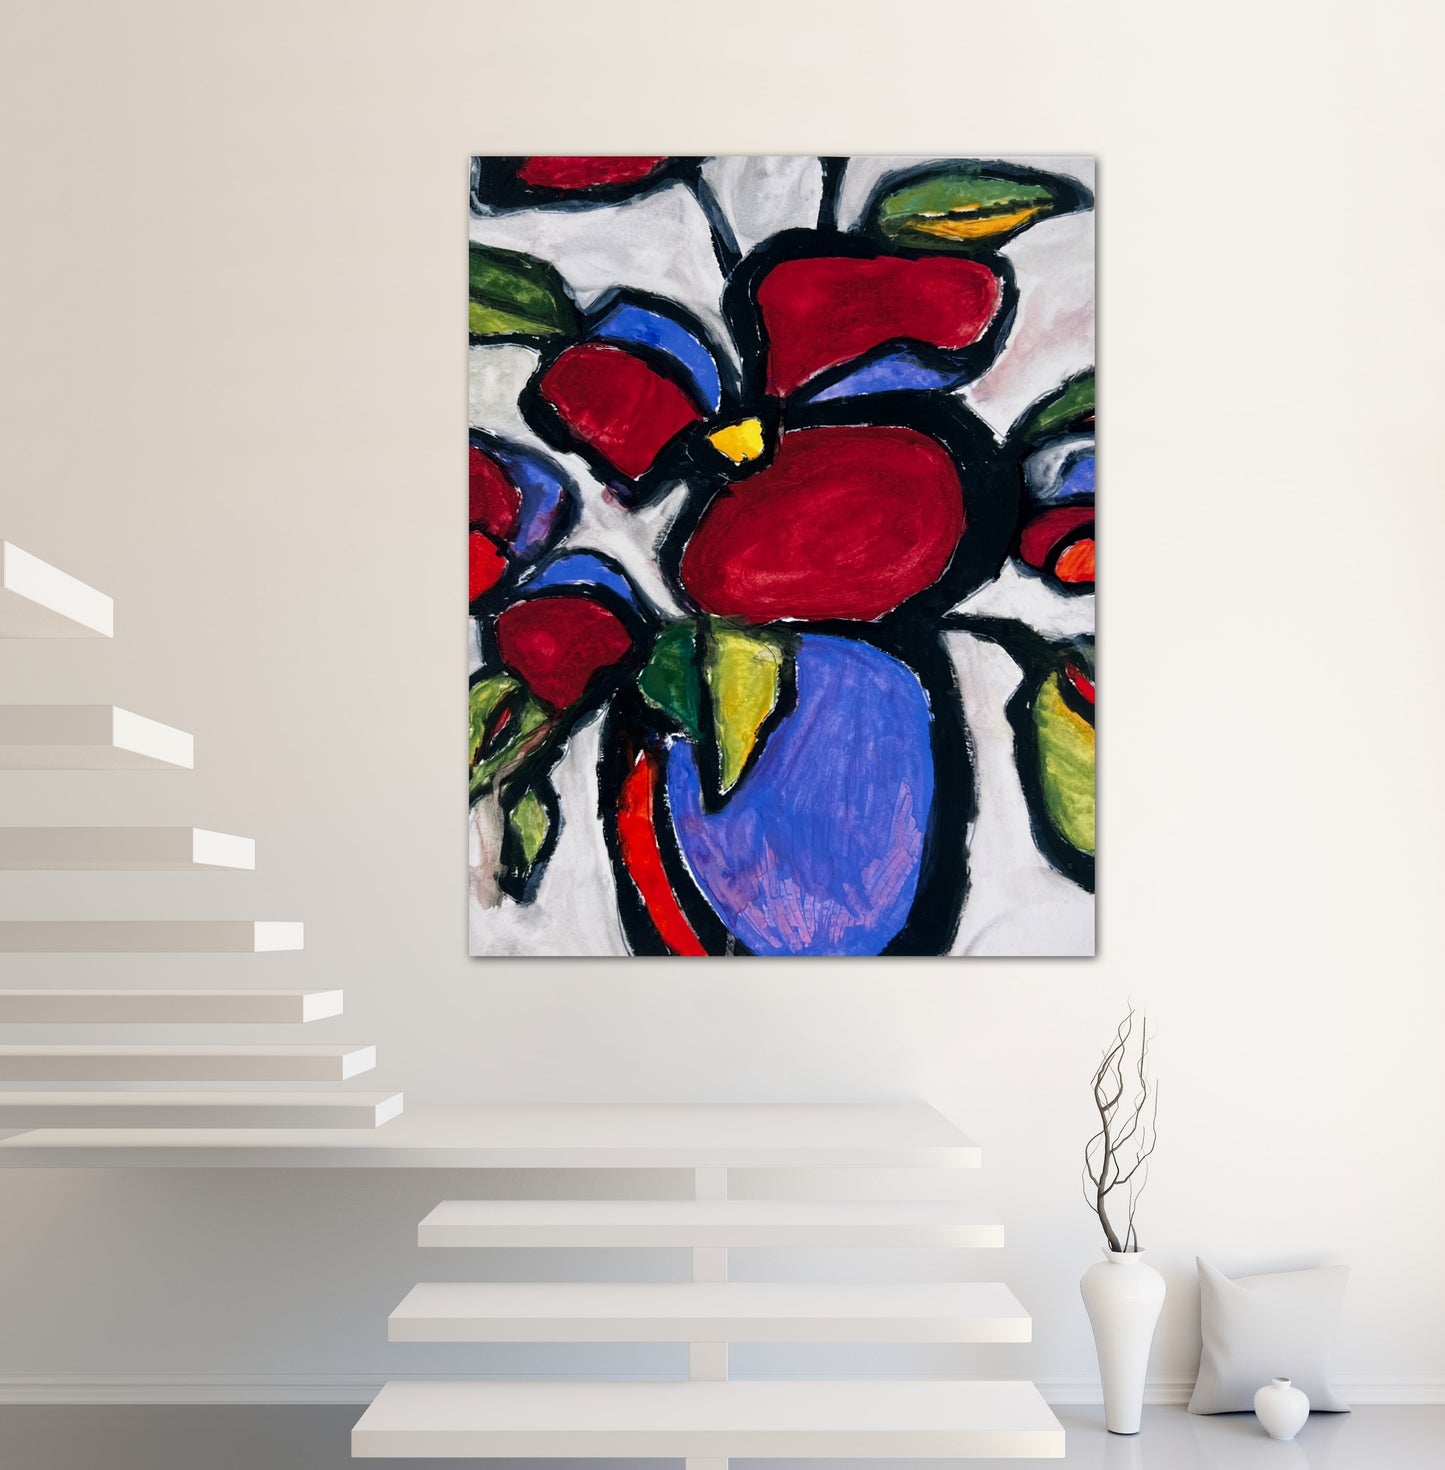 Flower 1 - Print, Poster and Stretched Canvas Print